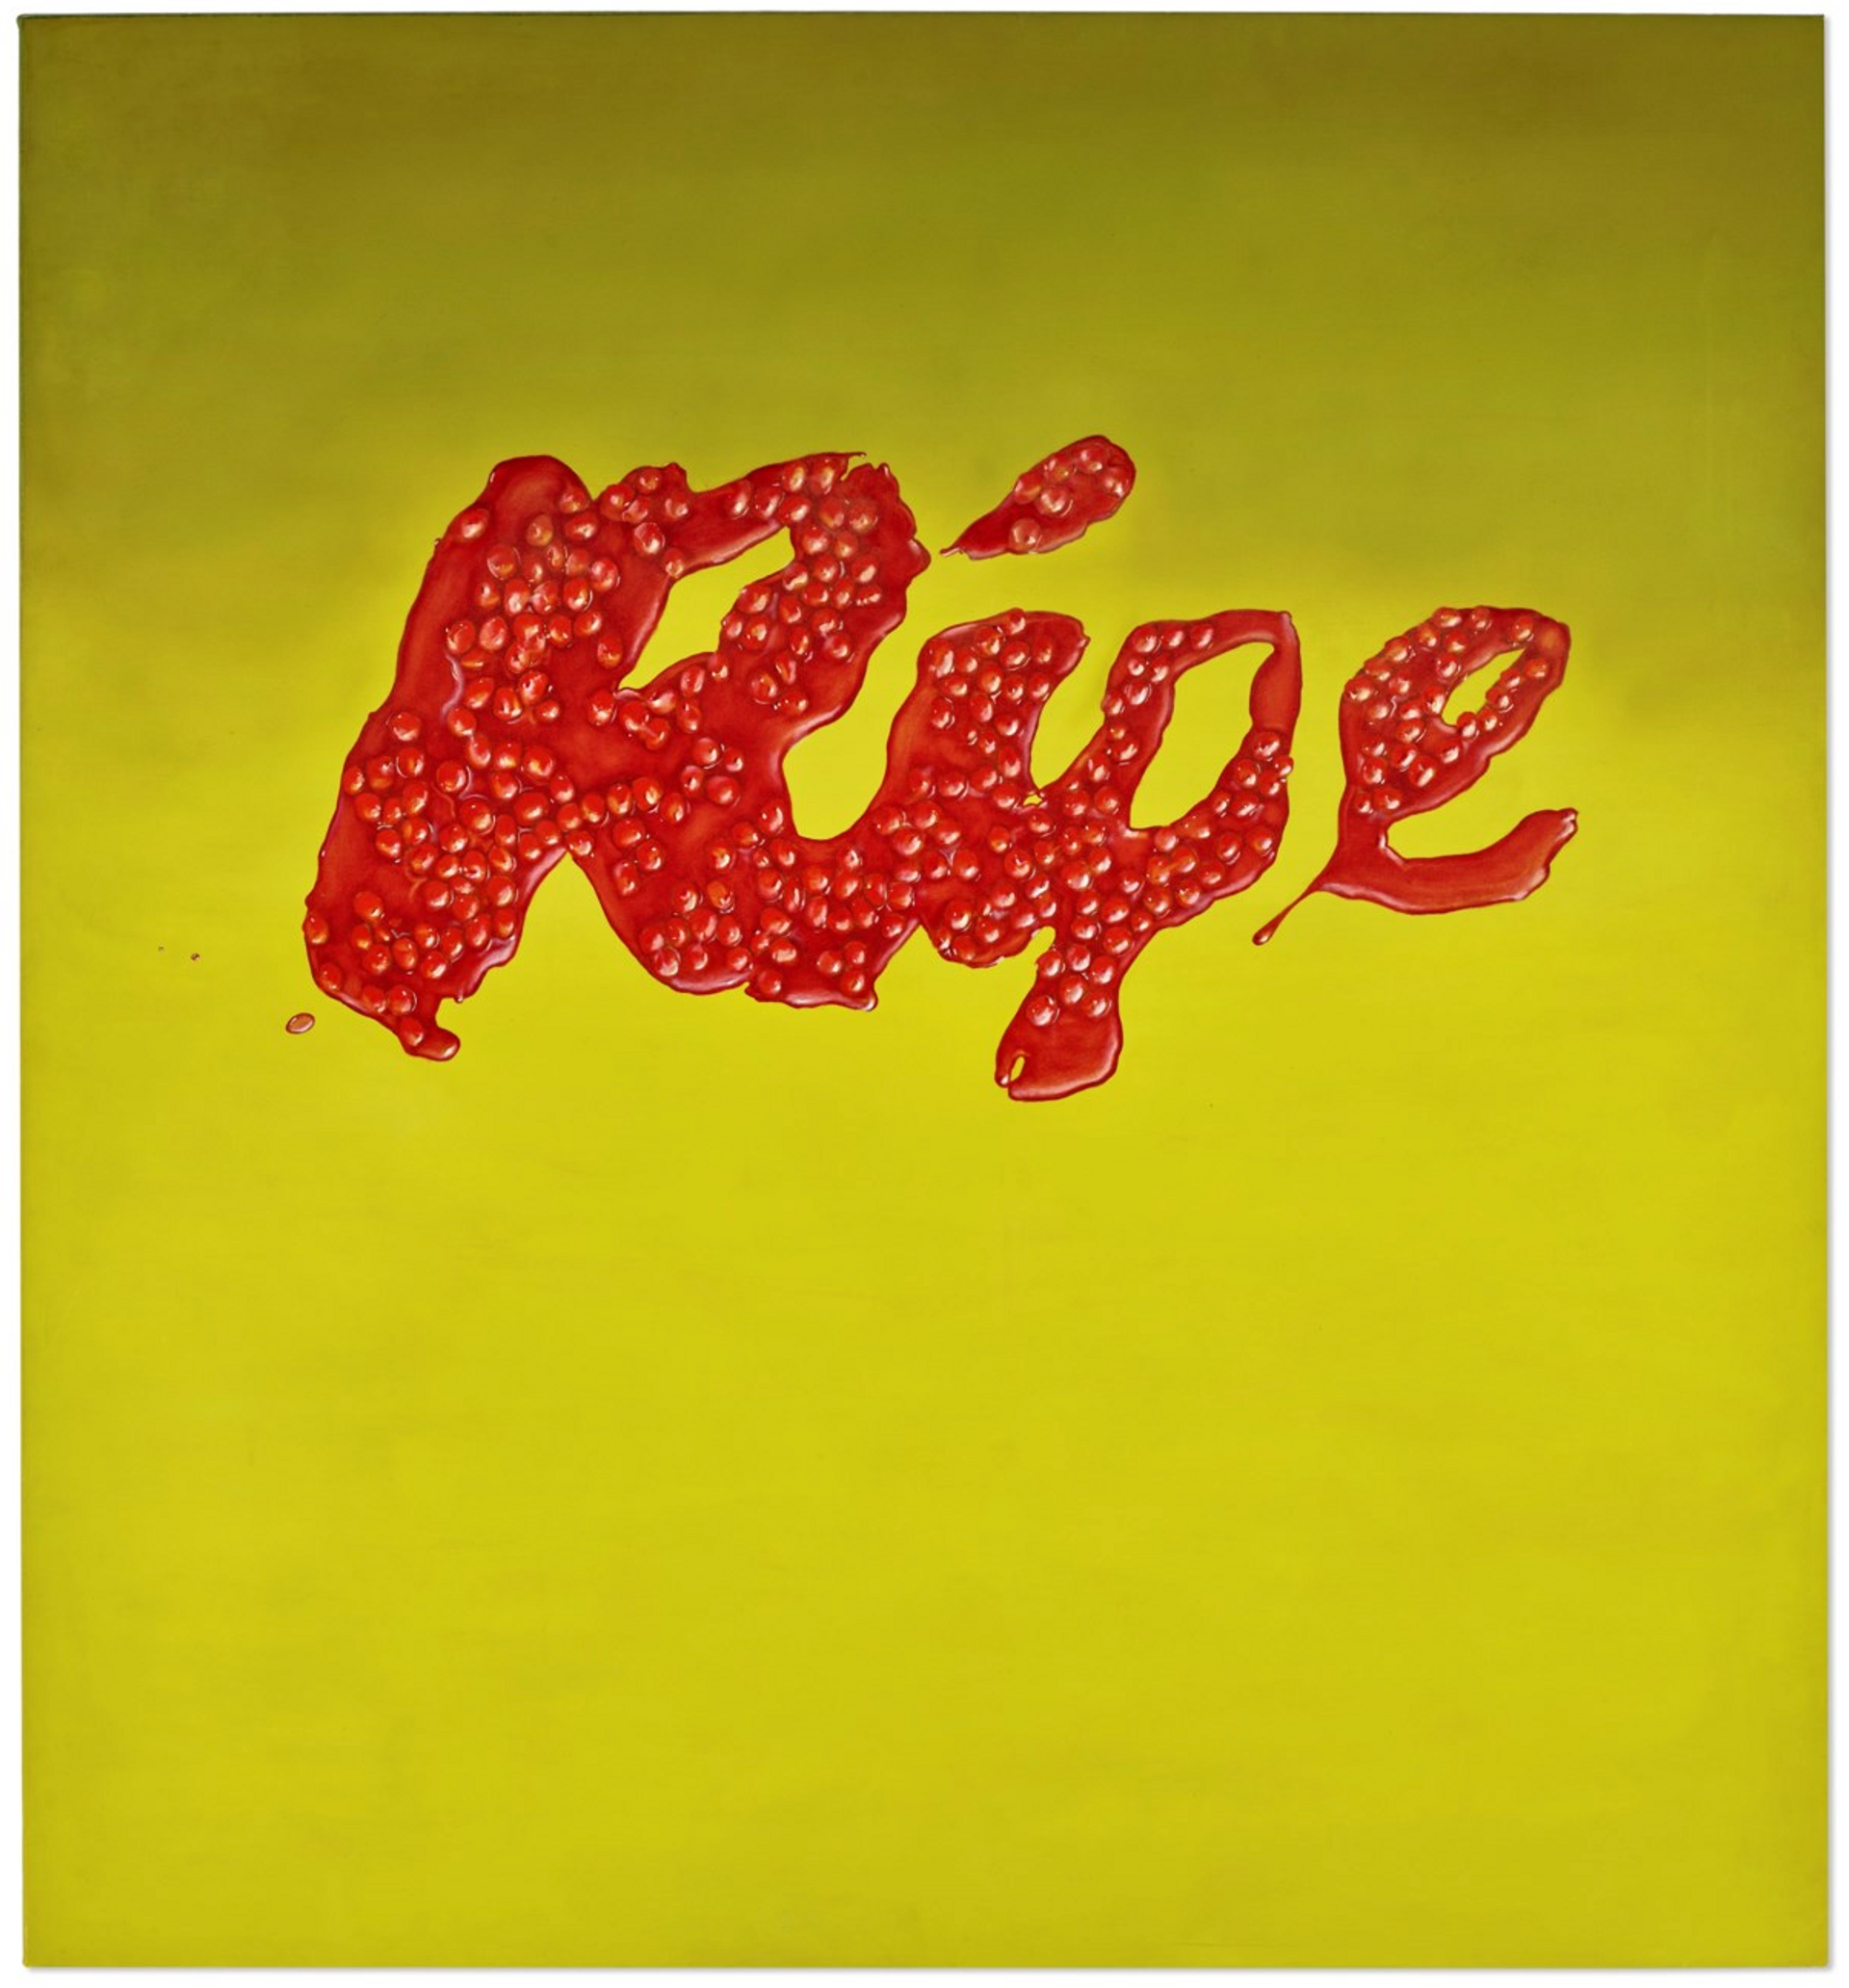 Painting by Ed Ruscha of the word 'ripe' in red lettering against a yellow-green background. The letterings is uneven and resembles pomegranate juice.